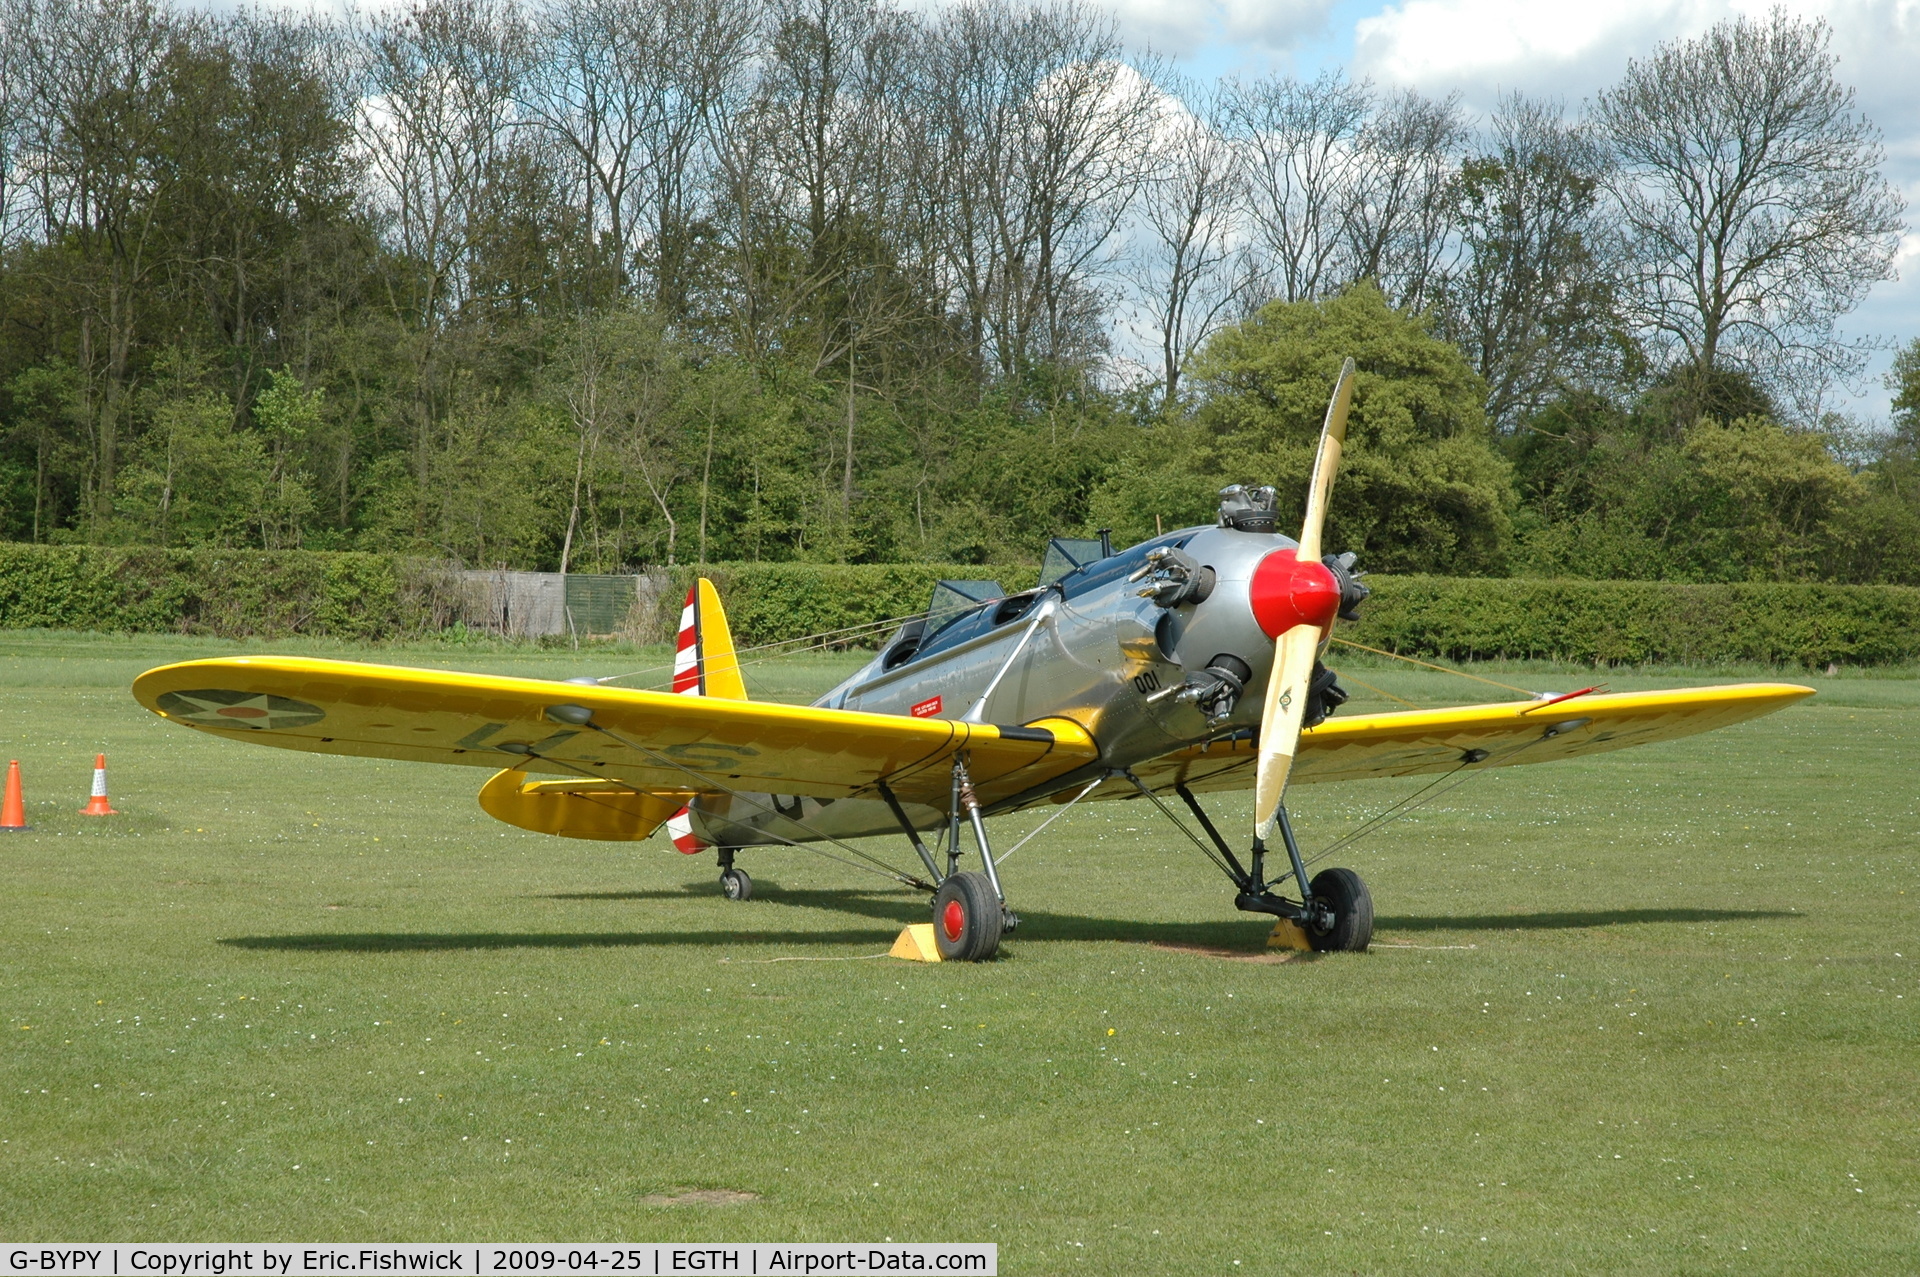 G-BYPY, 1941 Ryan PT-22 Recruit (ST3KR) C/N 1001, 3. G-BYPY at Shuttleworth (Old Warden) Aerodrome for a special occasion.